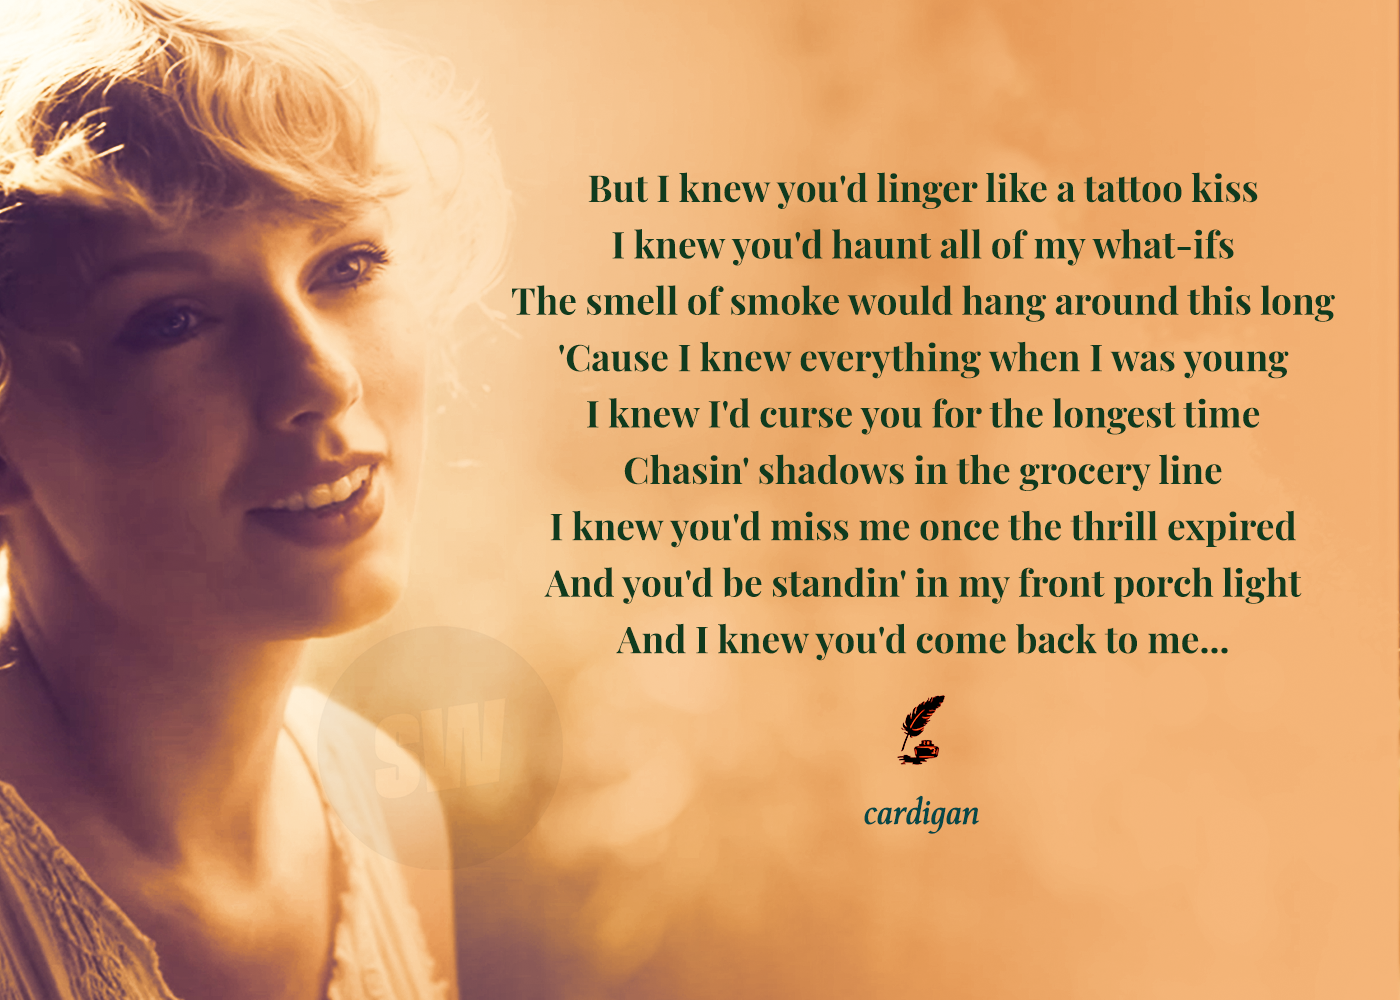 Taylor Swift Eras Tour Movie in India, best poetic songs